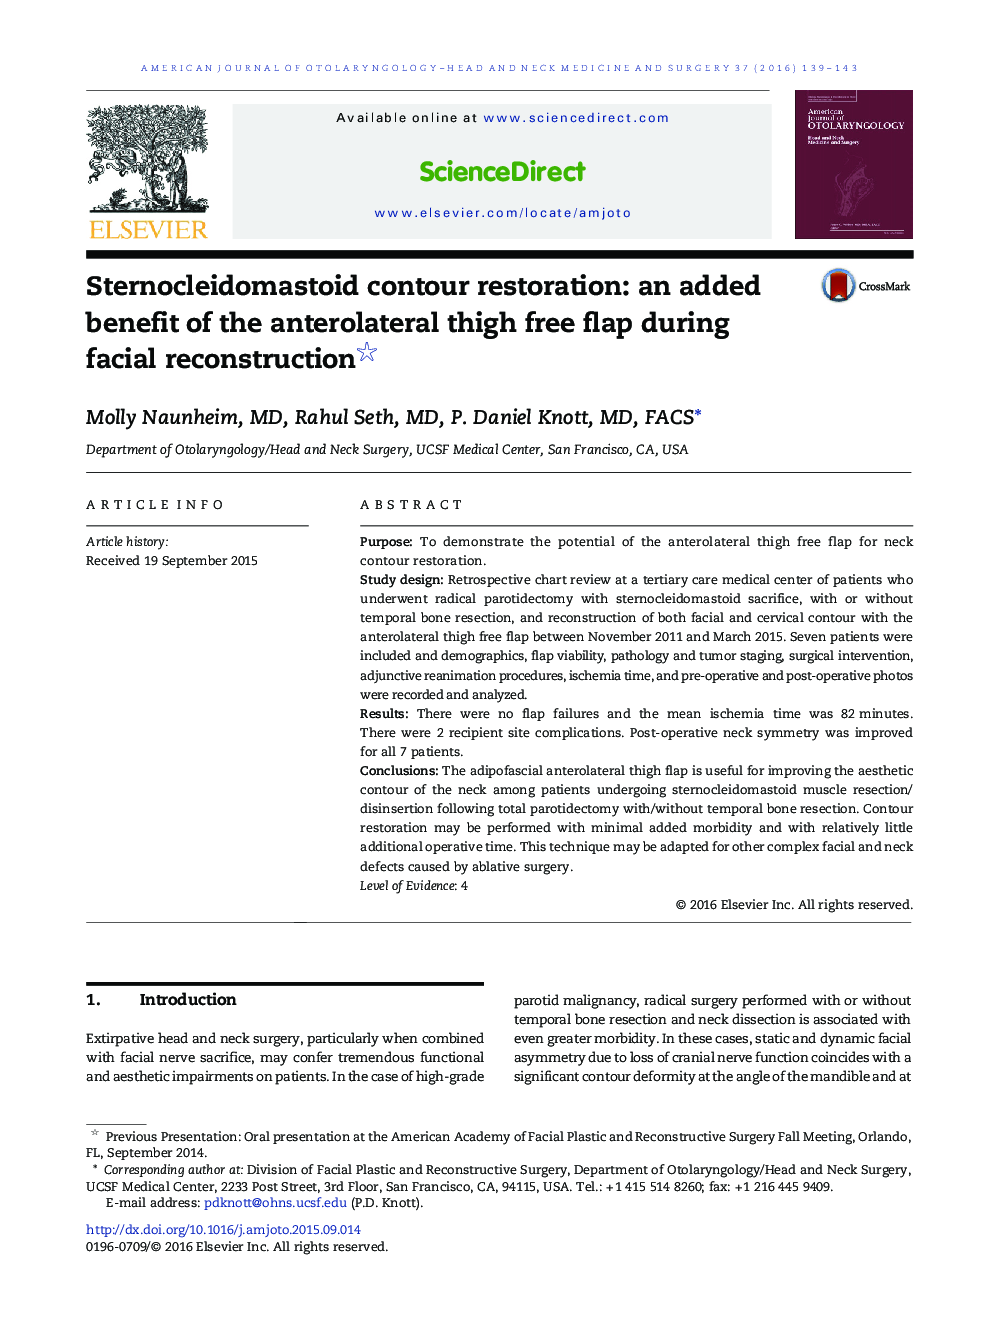 Sternocleidomastoid contour restoration: an added benefit of the anterolateral thigh free flap during facial reconstruction 